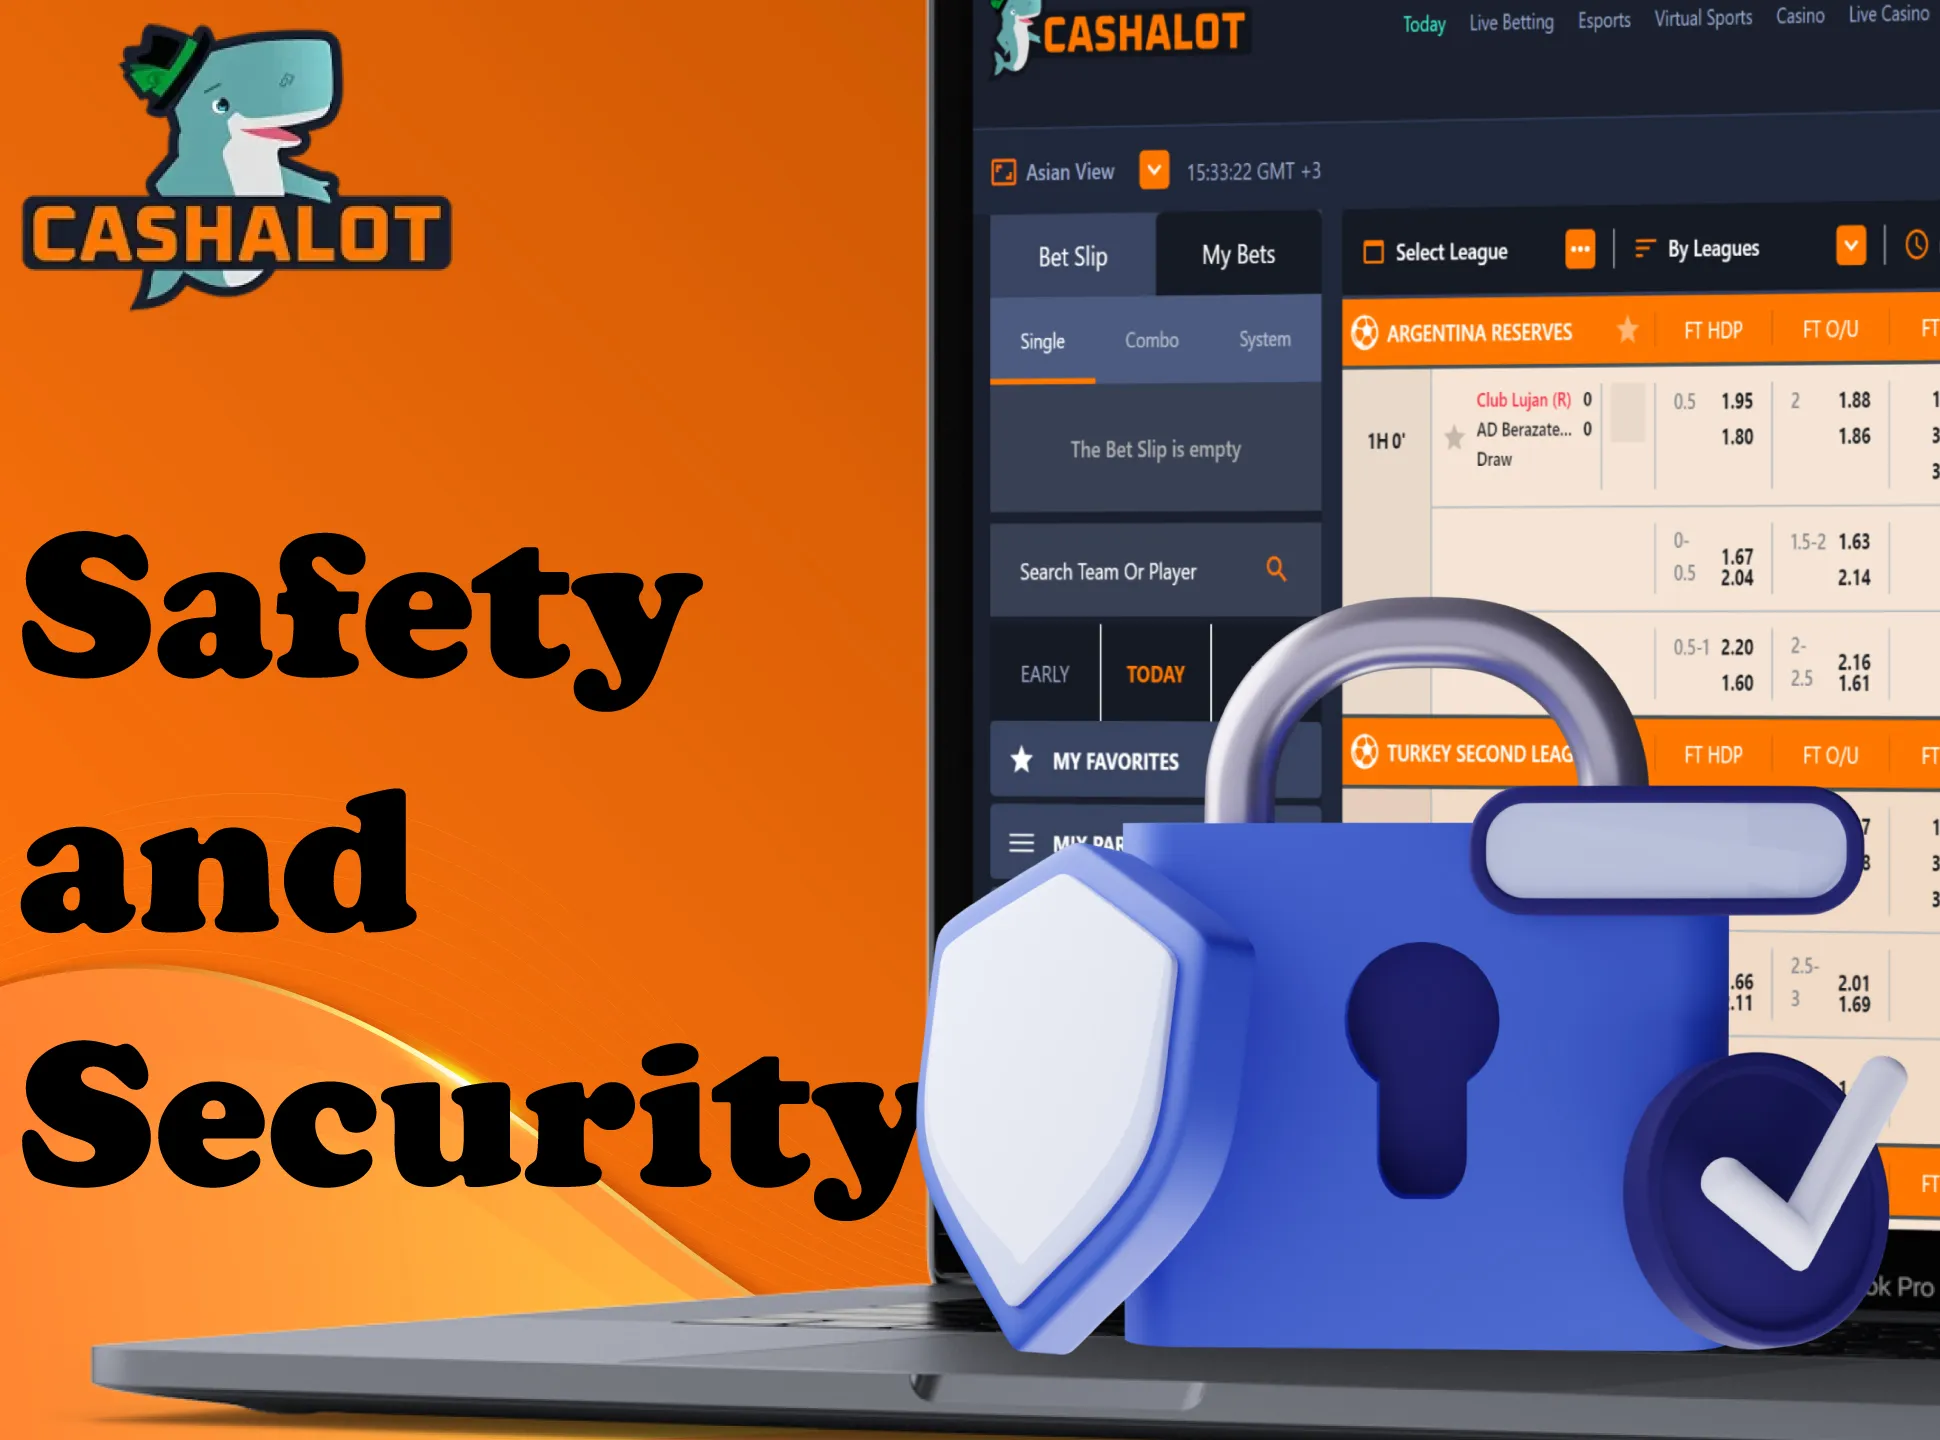 Cashalot secures all of your private data.